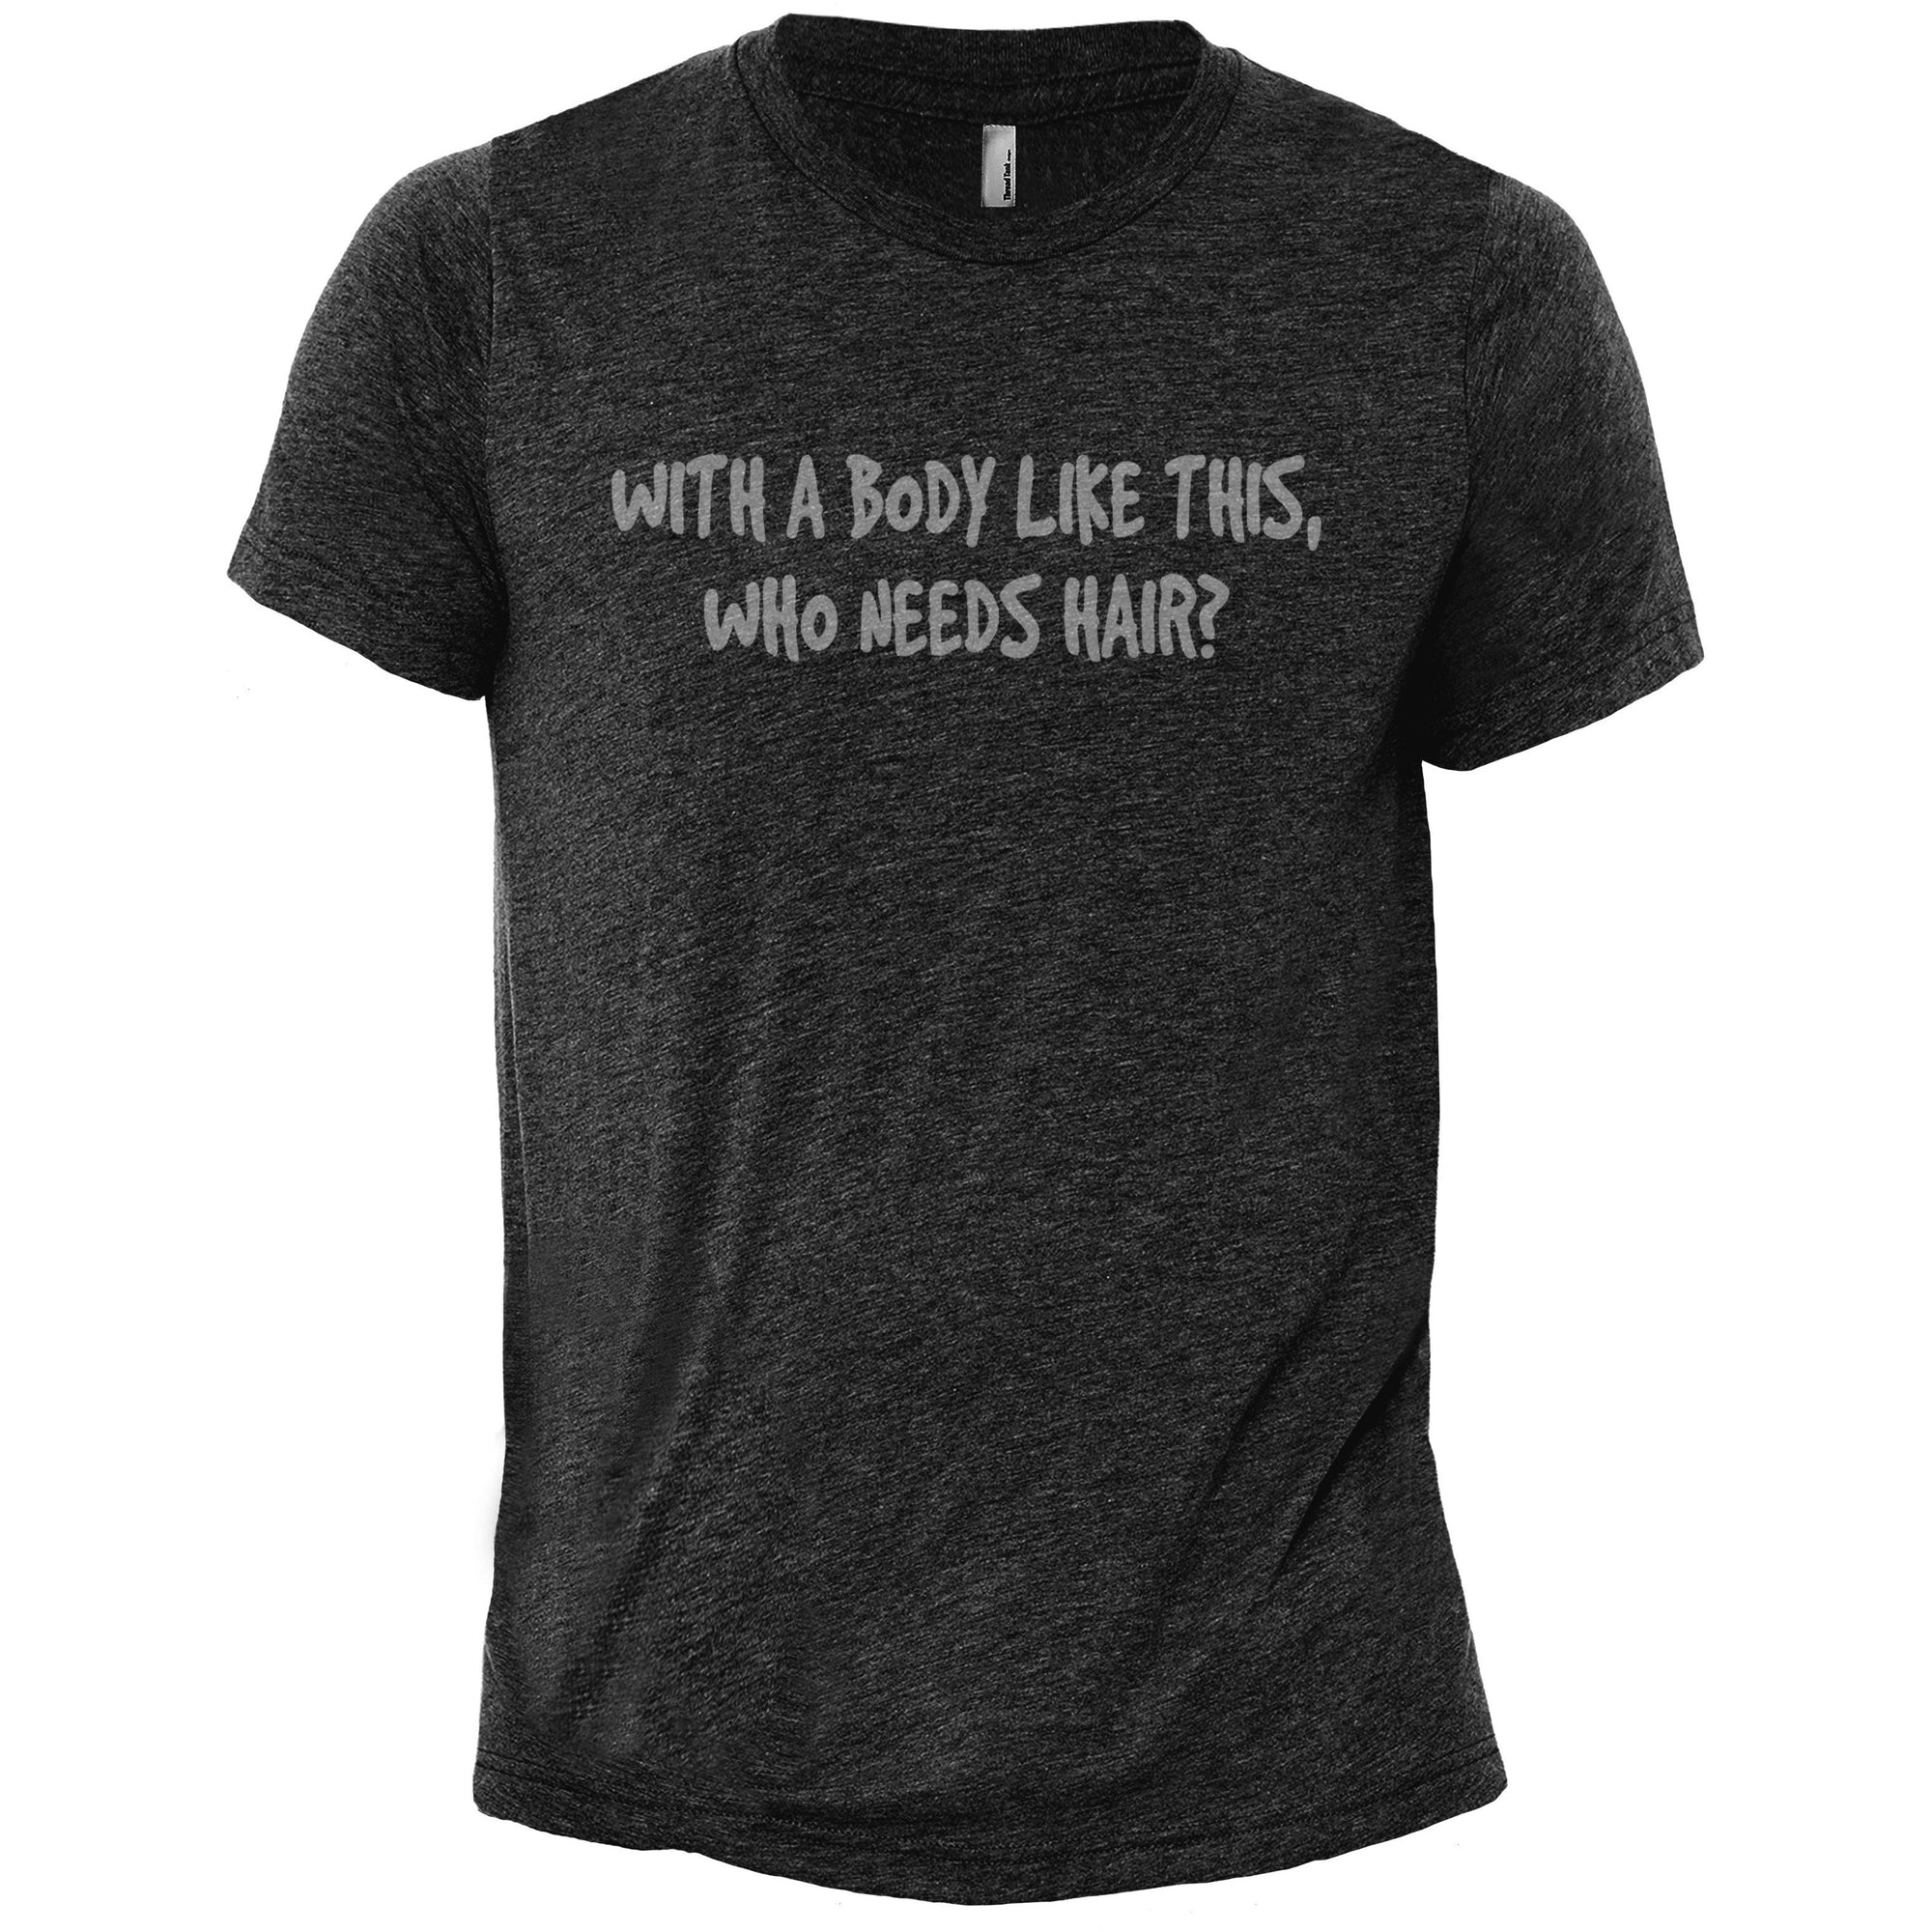 With A Body Like This Who Needs Hair Charcoal Printed Graphic Men's Crew T-Shirt Tee